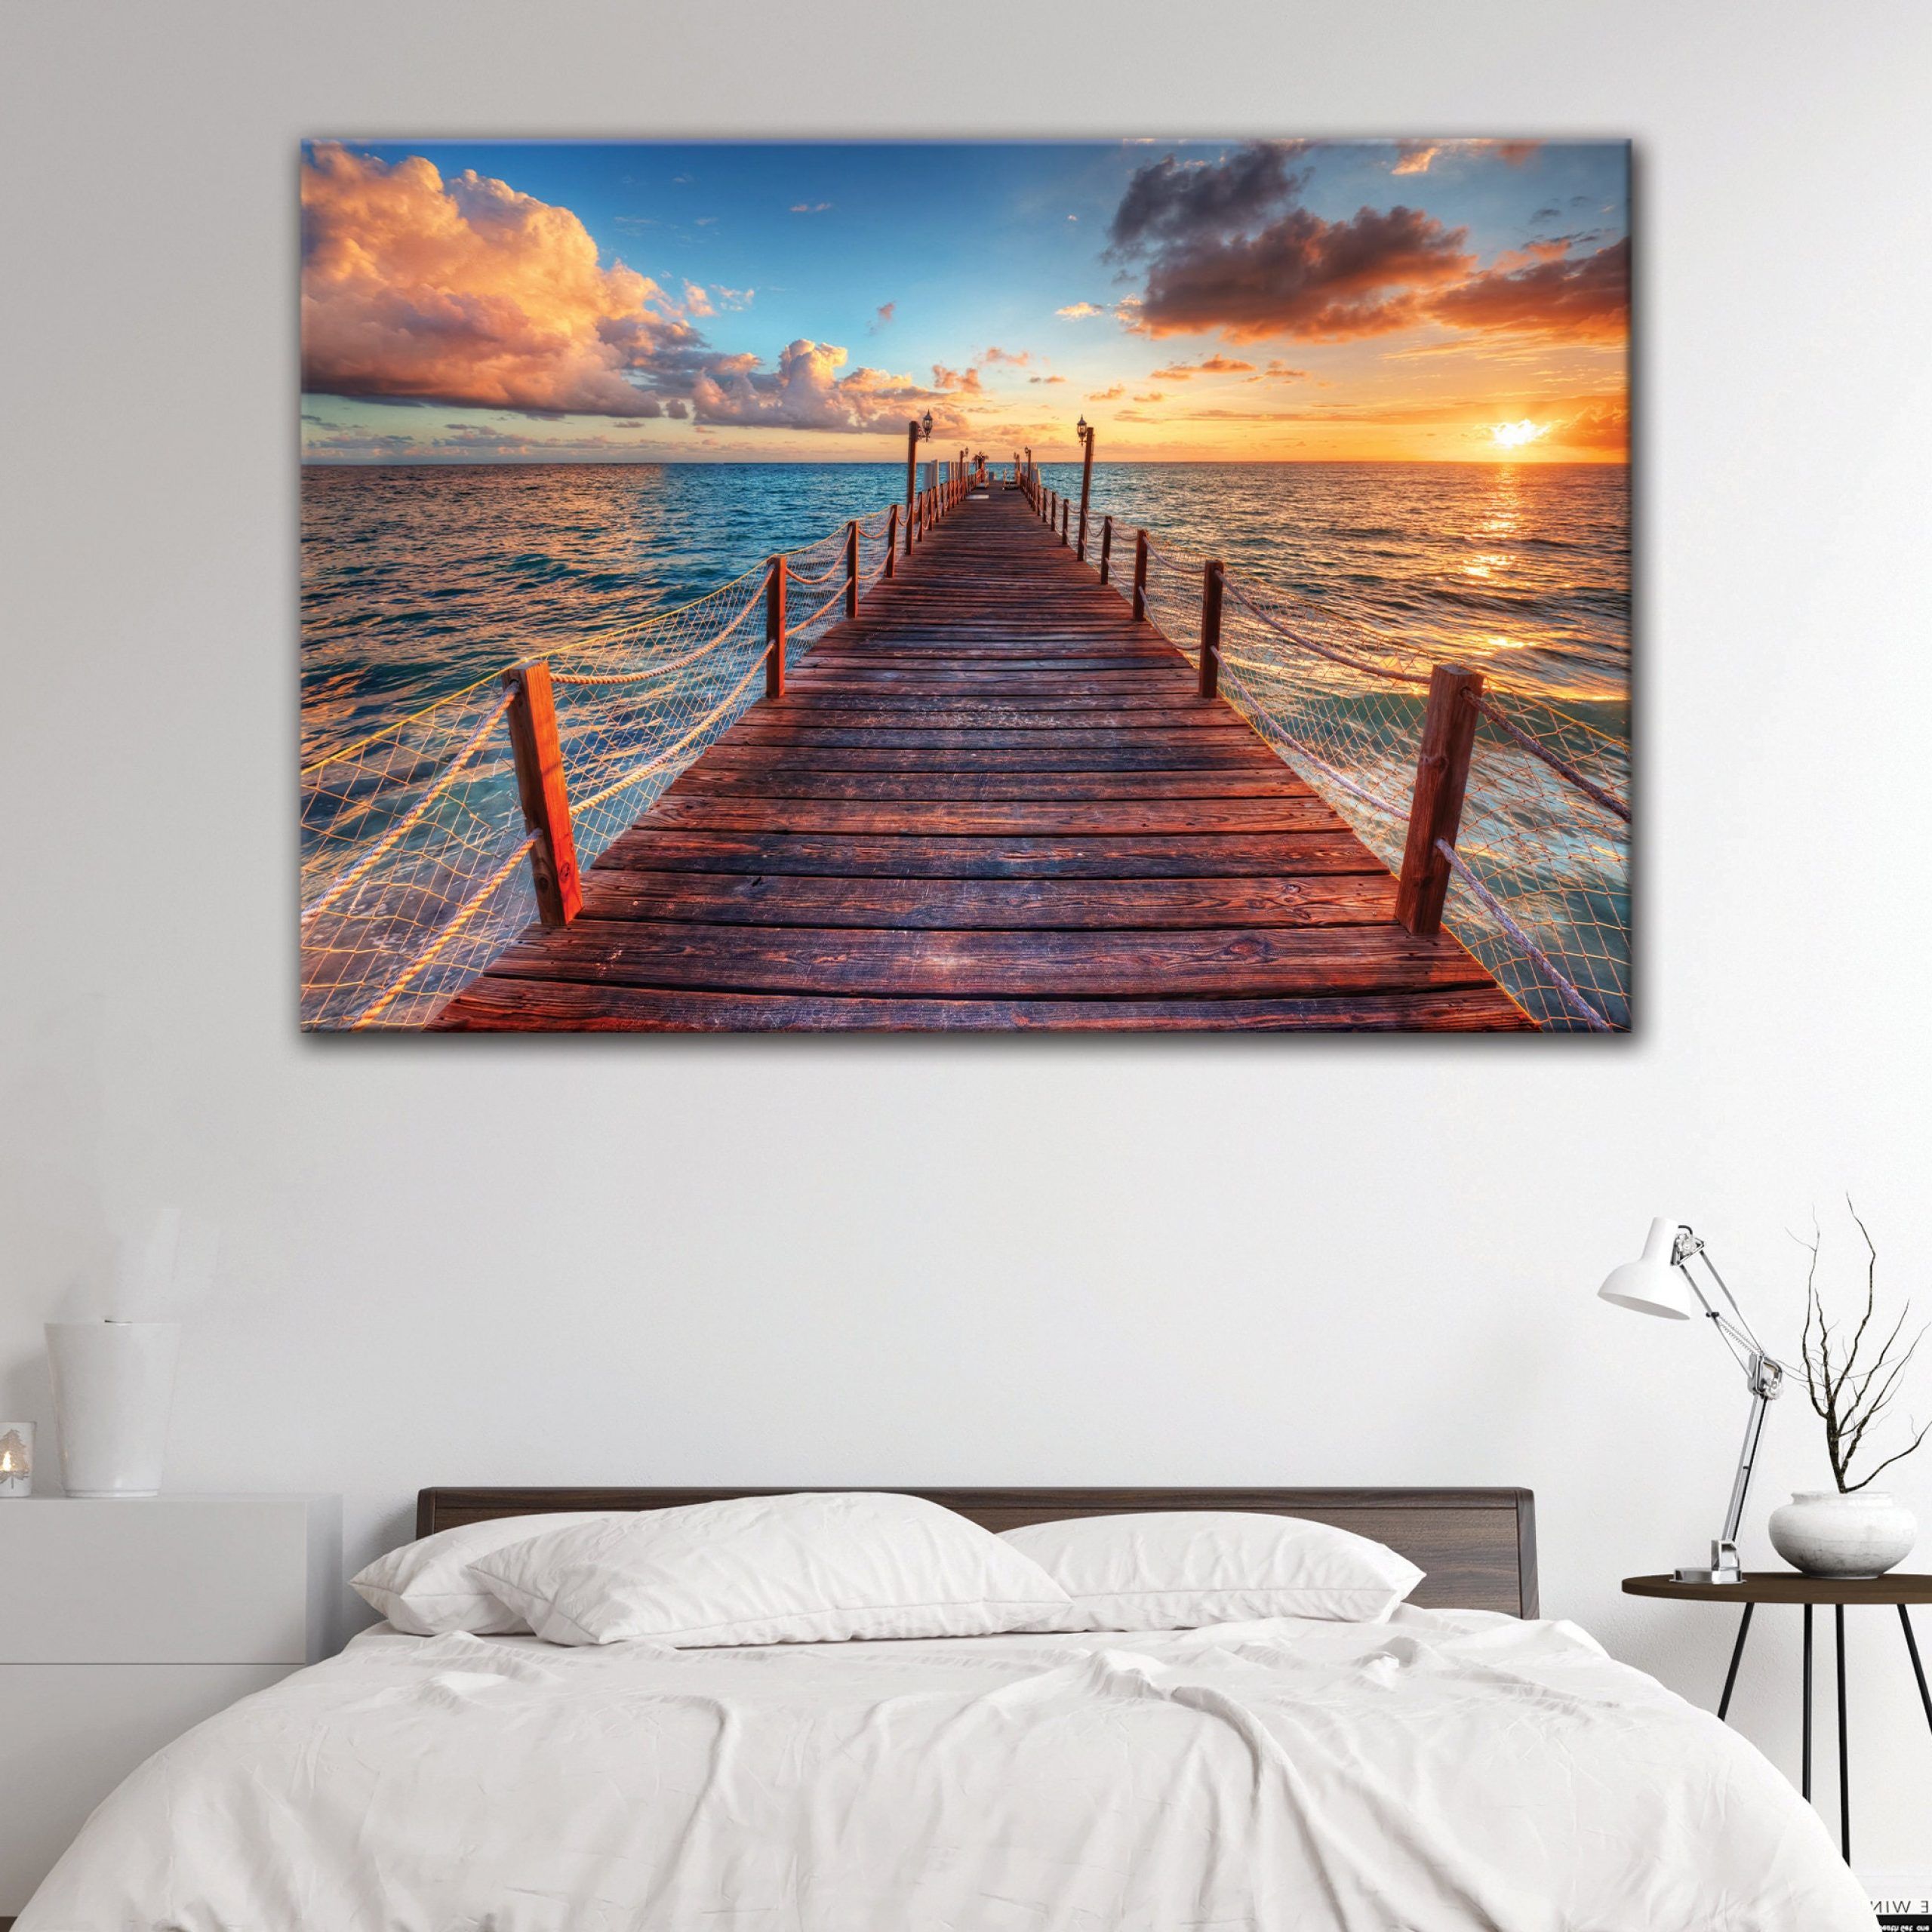 Sea Pier Wall Art 5 Panels Sea Sunrise Canvas Ocean Sunrise | Etsy For Most Current Pier Wall Art (View 1 of 20)